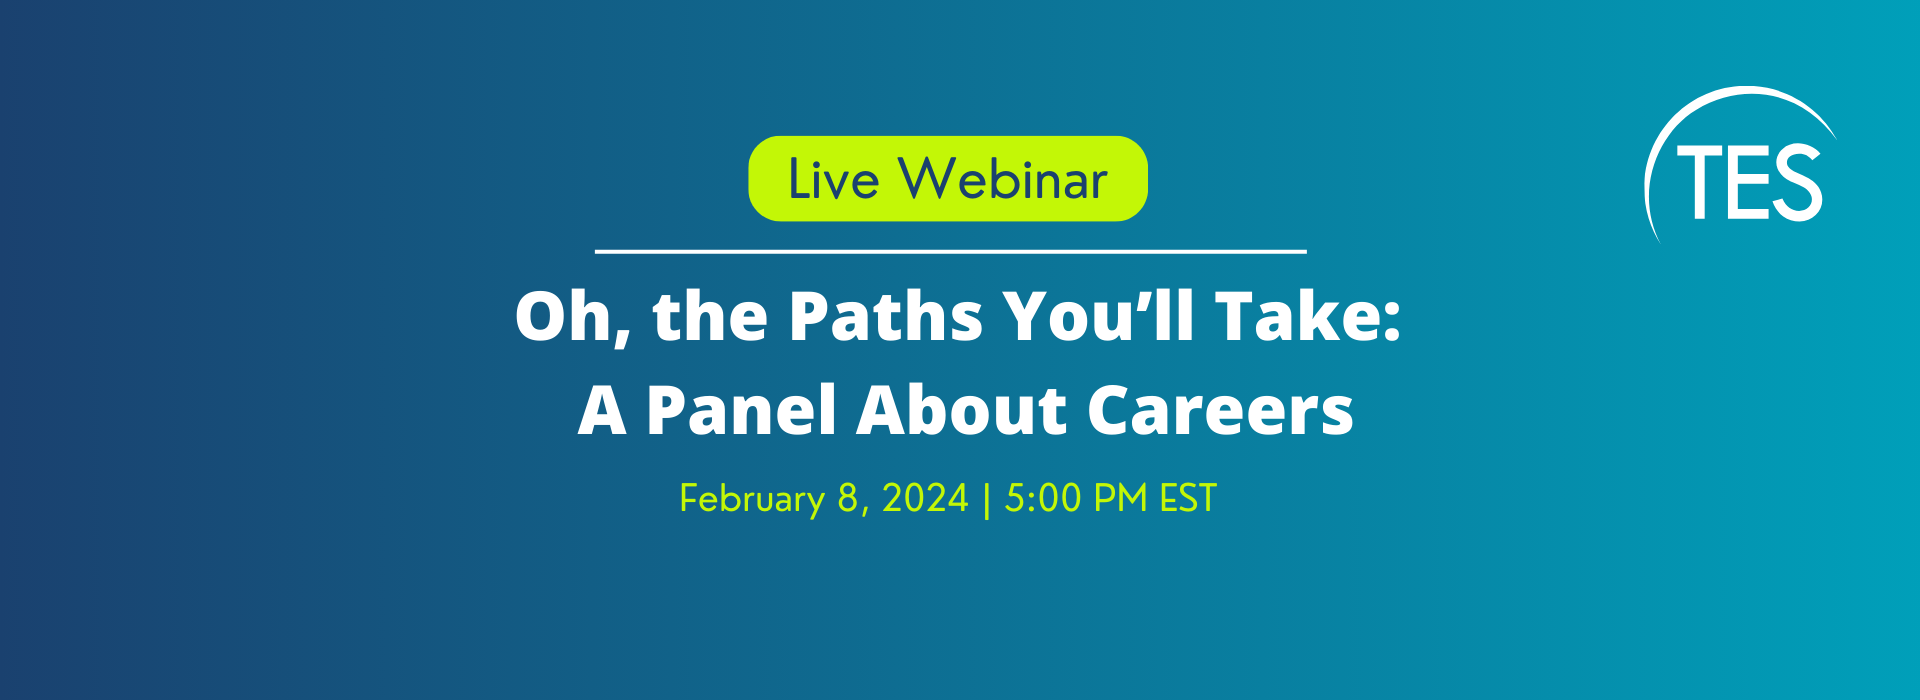 Oh, the Paths You’ll Take:  A Panel about Careers